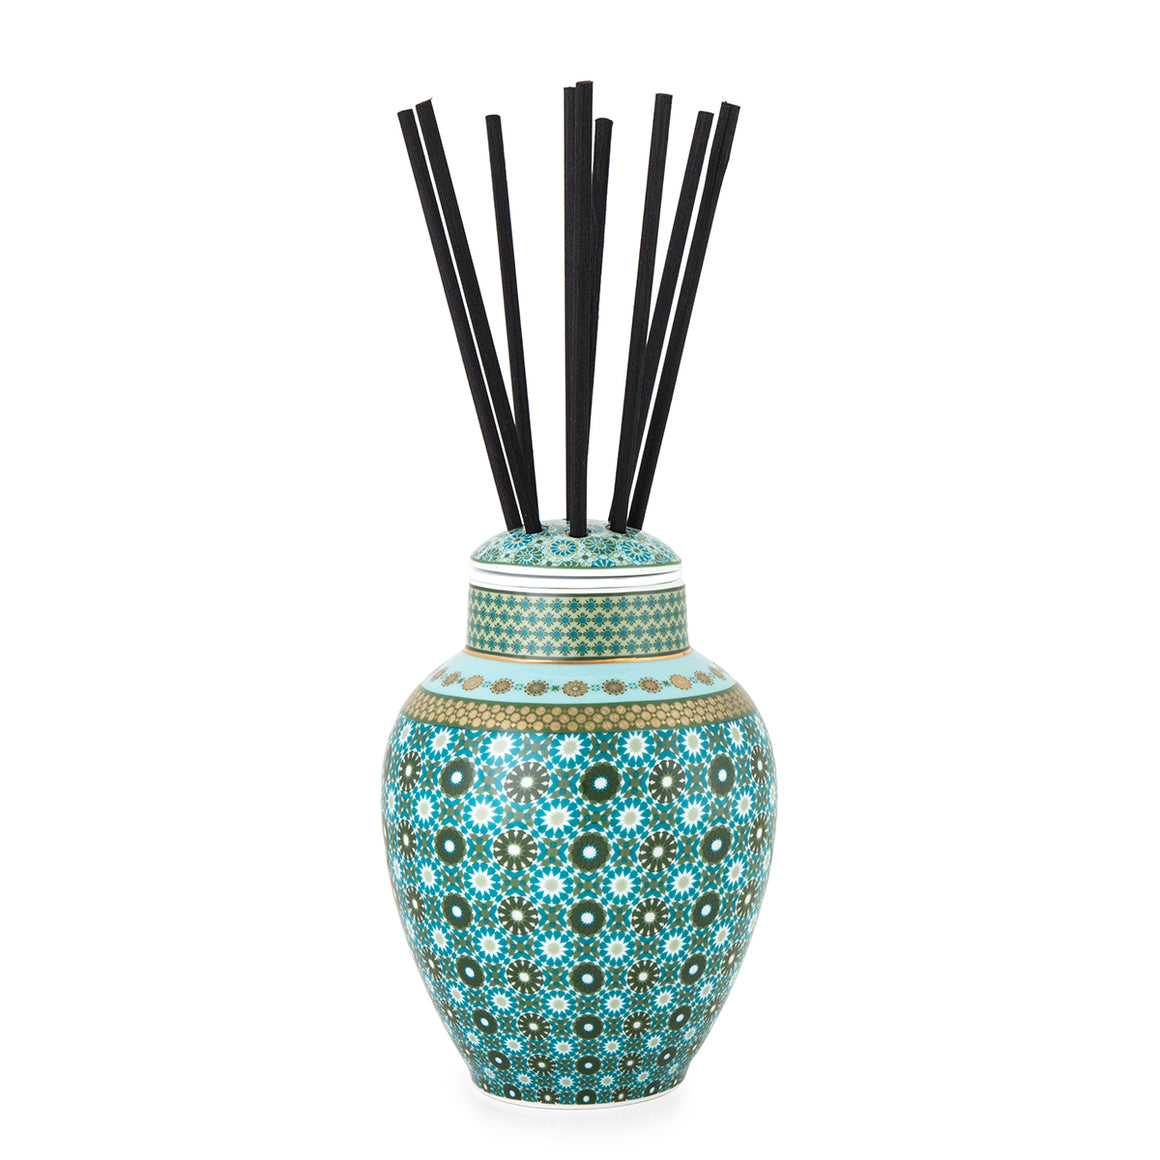 Porcelain Diffuser-Andalusia (oil not included)